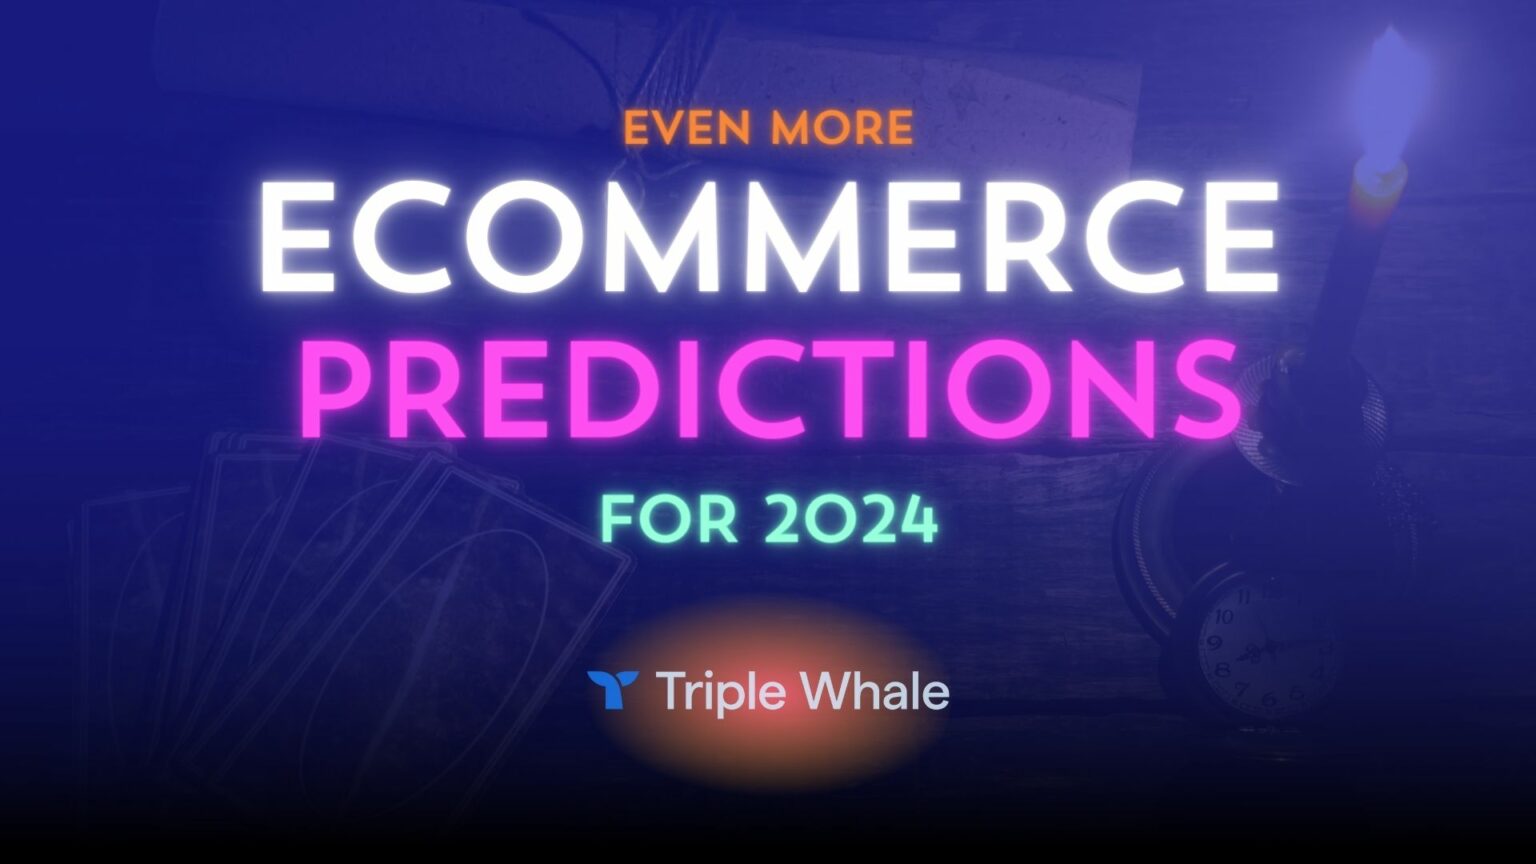 5 Platform-Specific eCommerce Predictions for 2024